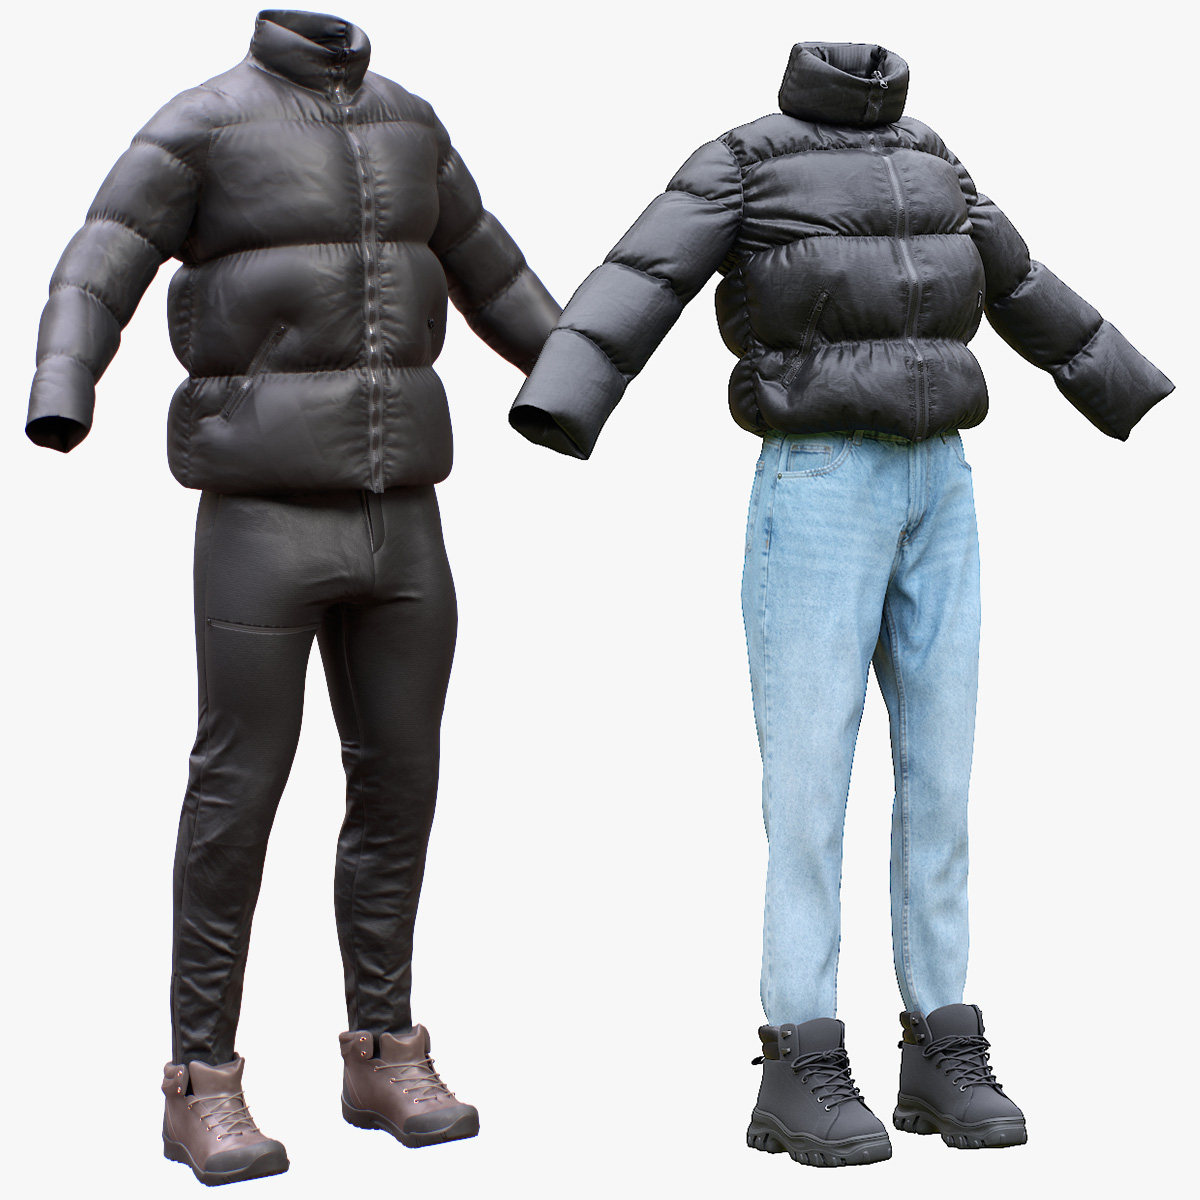 A 3D collection of winter clothing by Nice Pictures, one of our favorite 3D models.